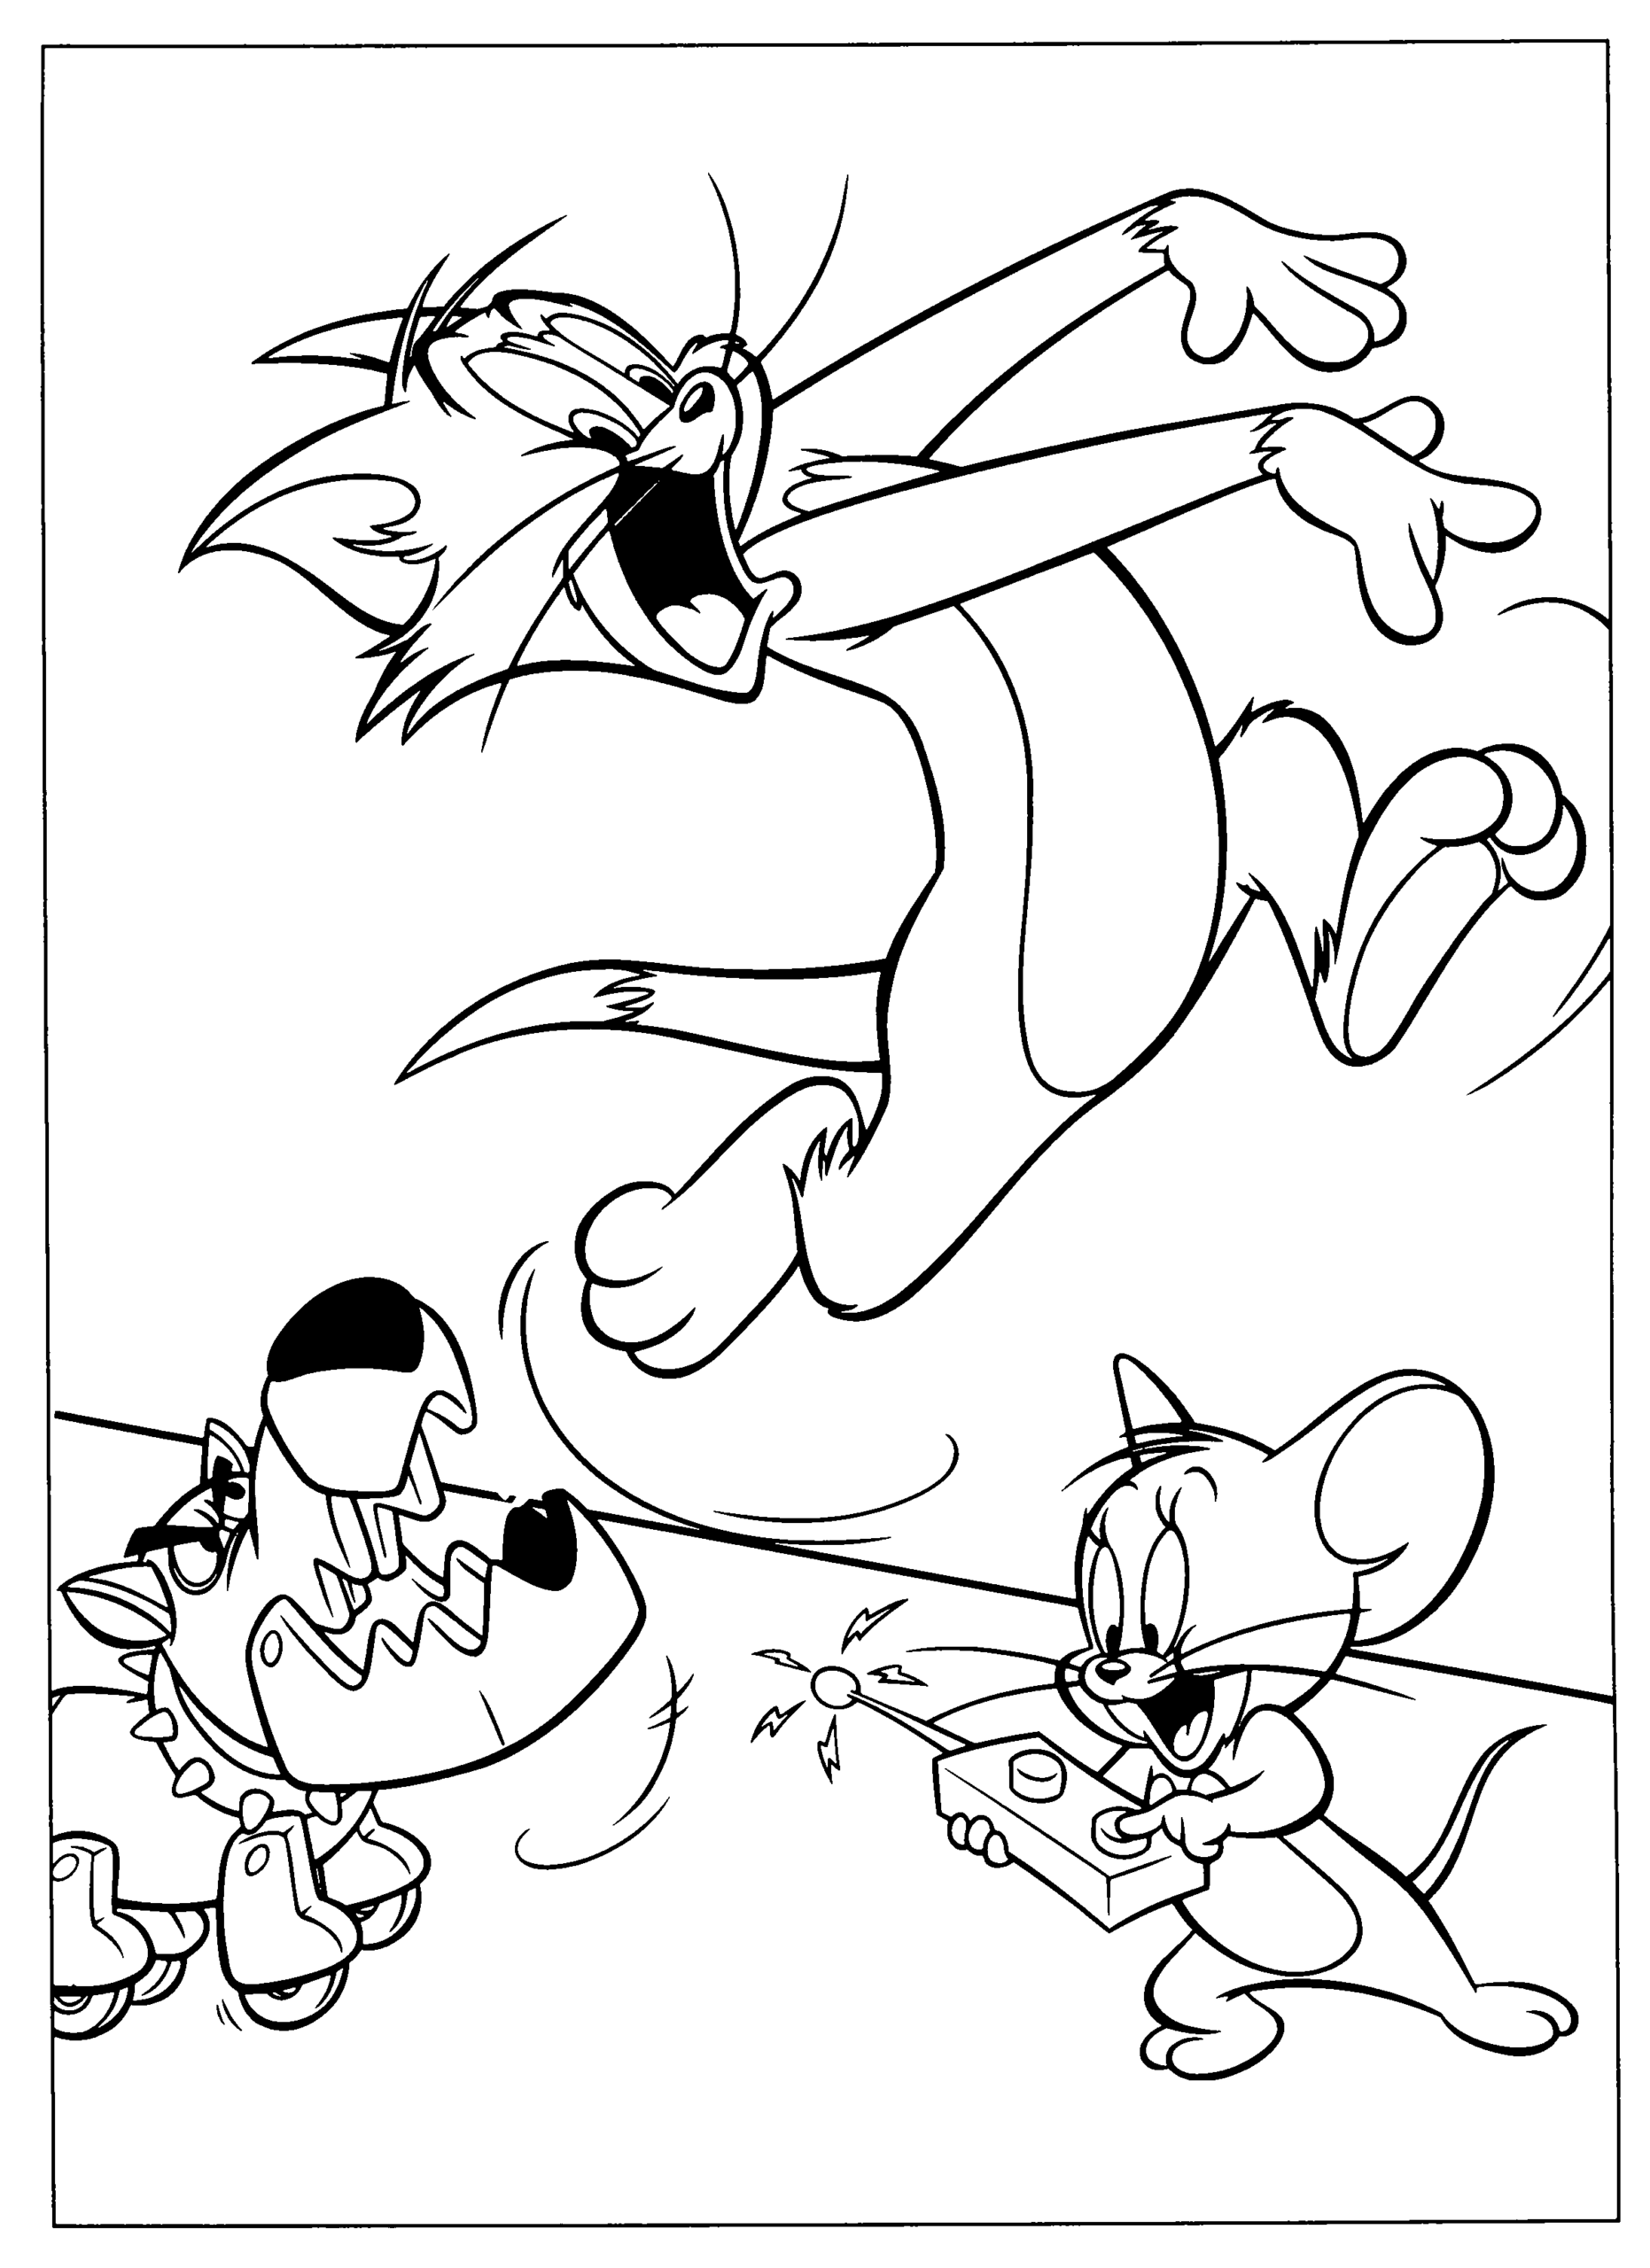 Tom and Jerry Coloring Pages TV Film tom and jerry 9 Printable 2020 10225 Coloring4free